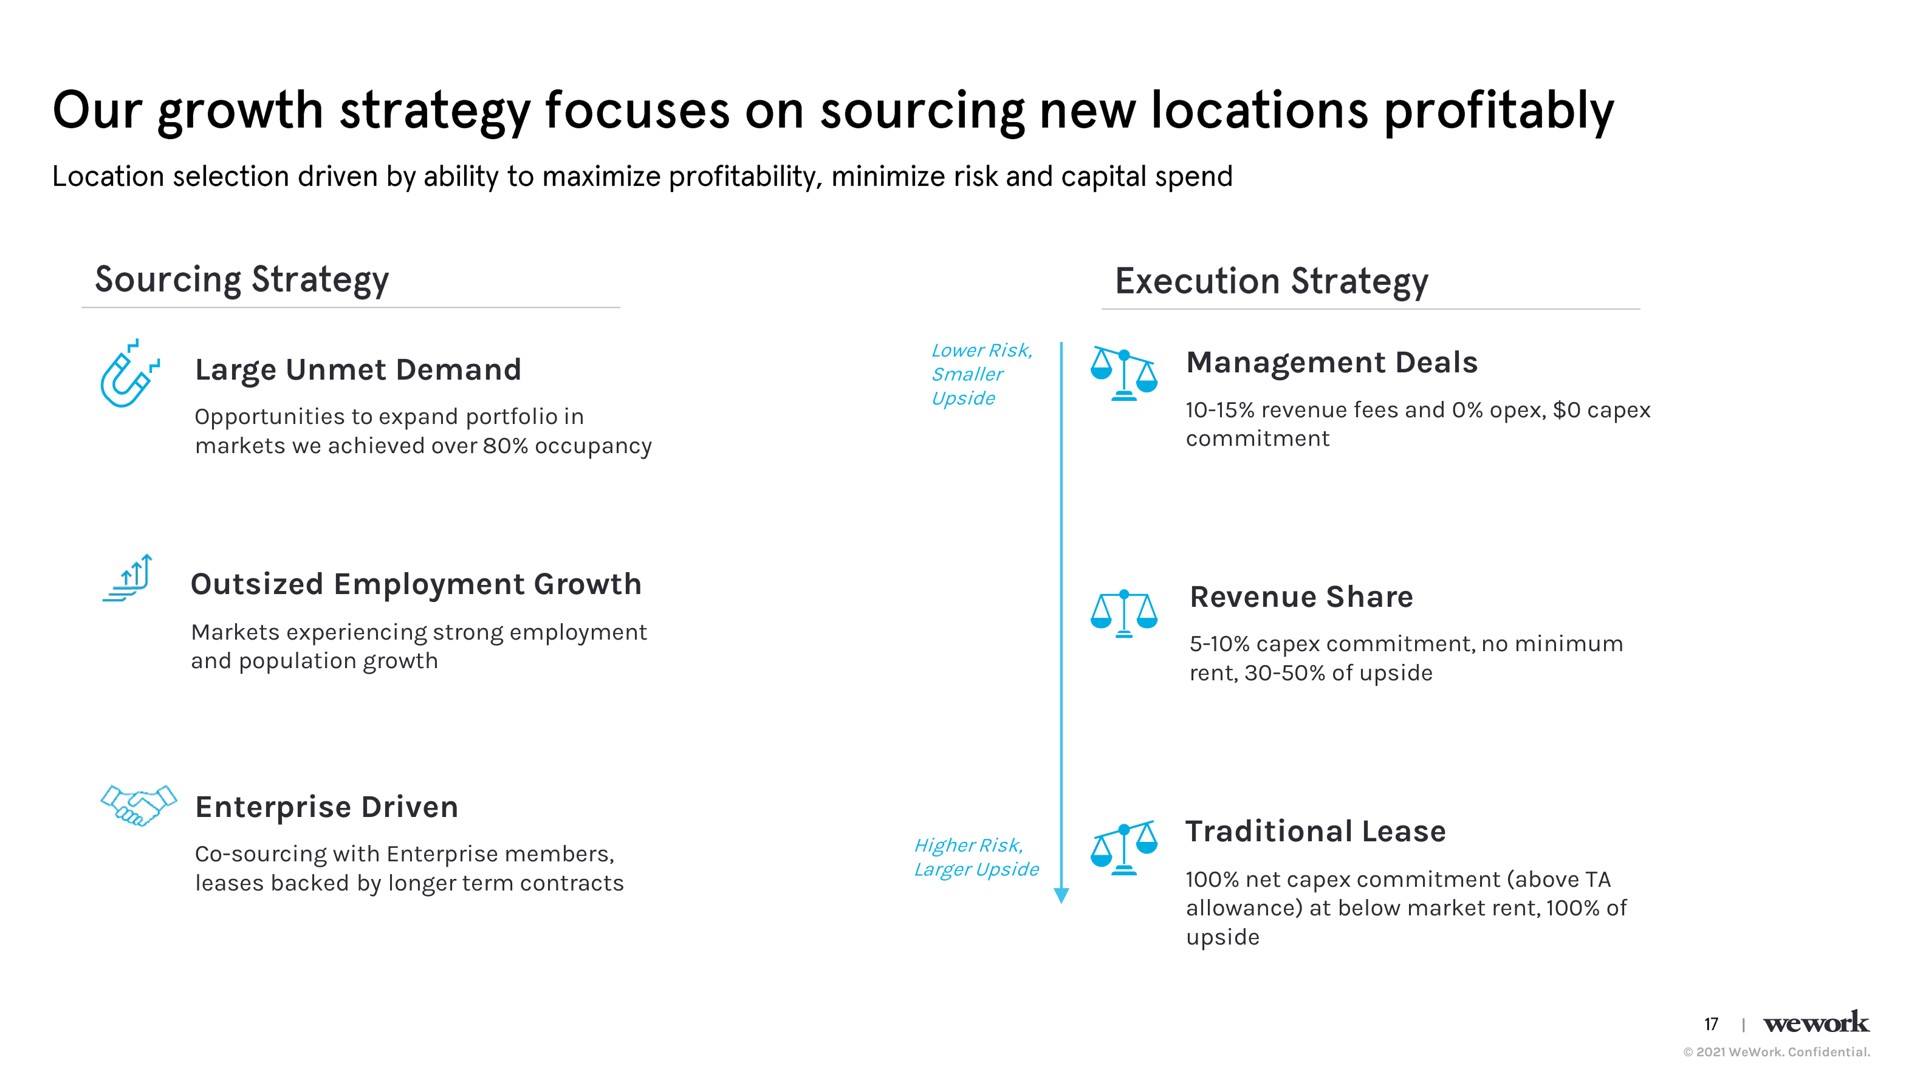 large unmet demand management deals outsized employment growth enterprise driven revenue share traditional lease our strategy focuses on sourcing new locations profitably sourcing strategy execution strategy | WeWork